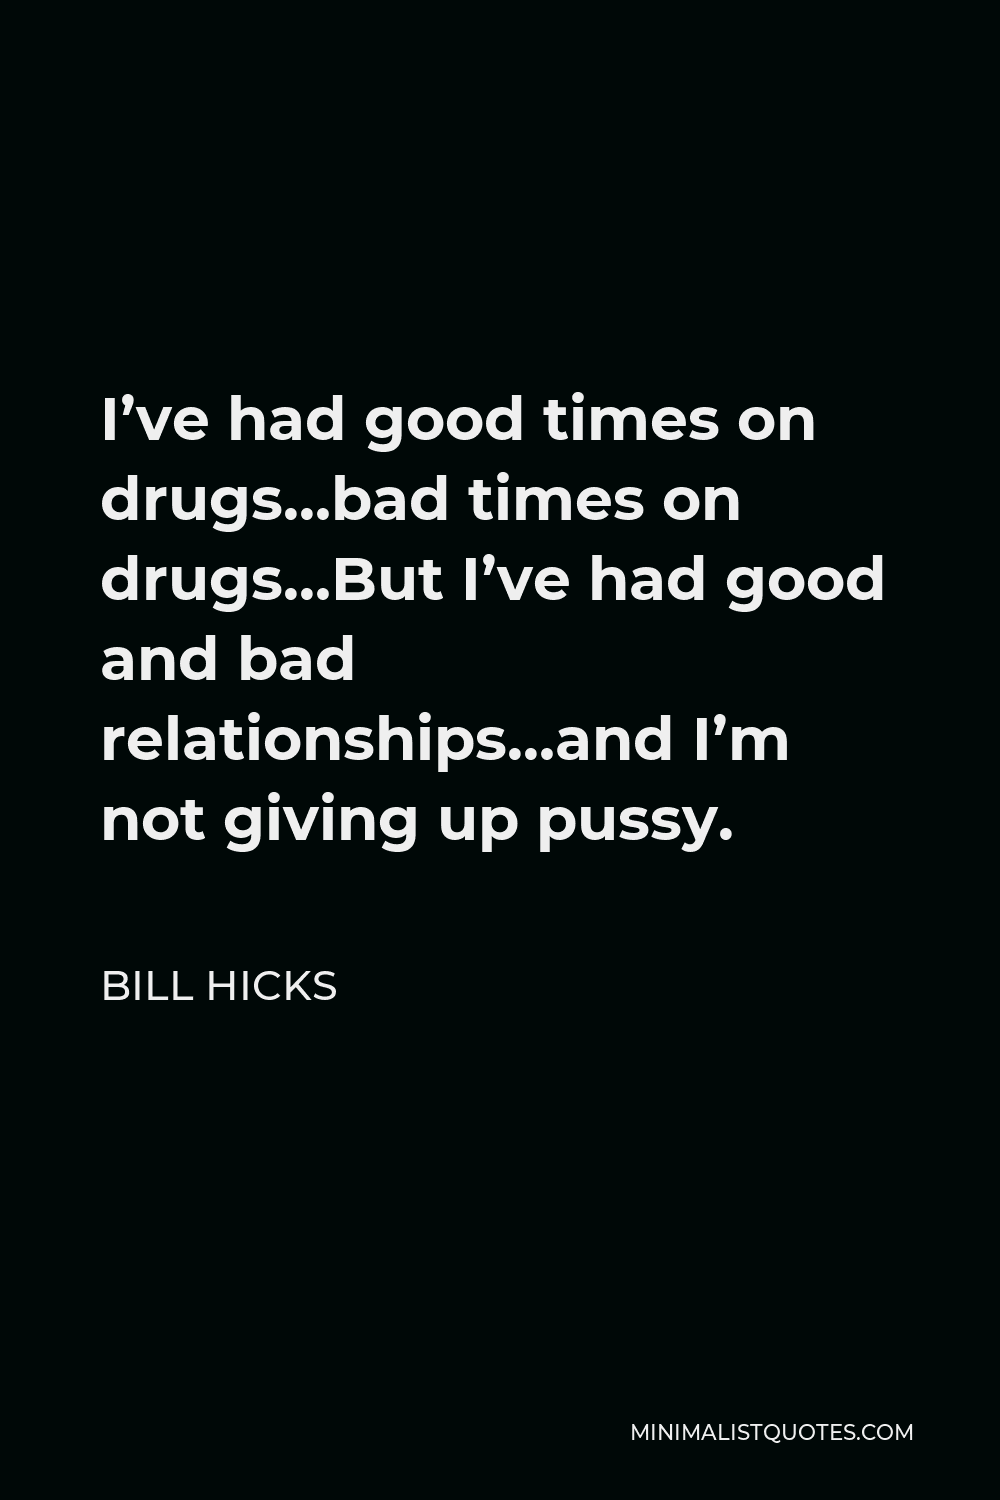 Bill Hicks Quote - I’ve had good times on drugs…bad times on drugs…But I’ve had good and bad relationships…and I’m not giving up pussy.